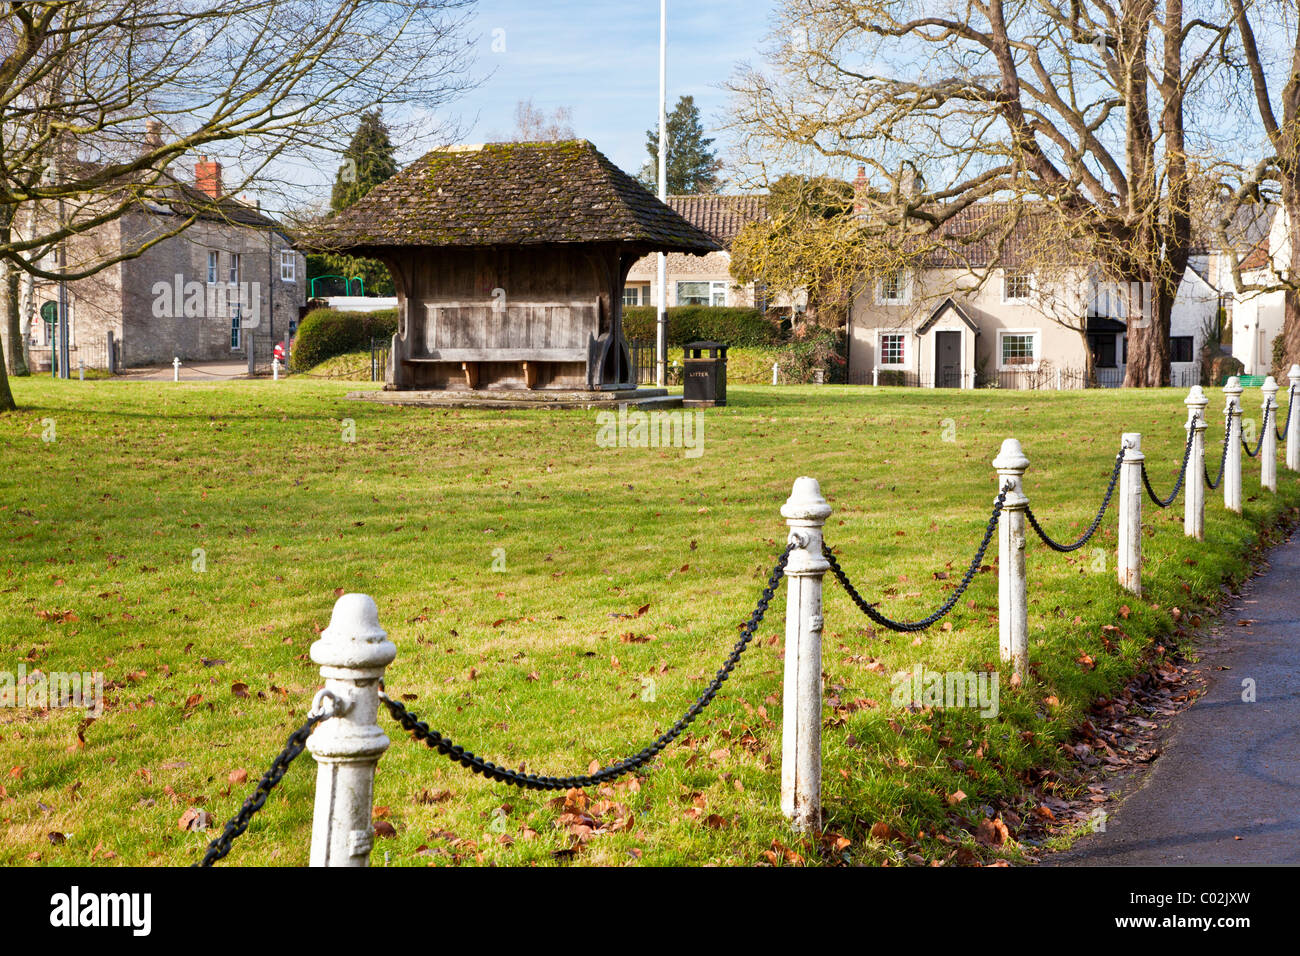 The village green, known as Ham Green, with flagpole and bench, in the village of Holt, Wiltshire, England, UK Stock Photo